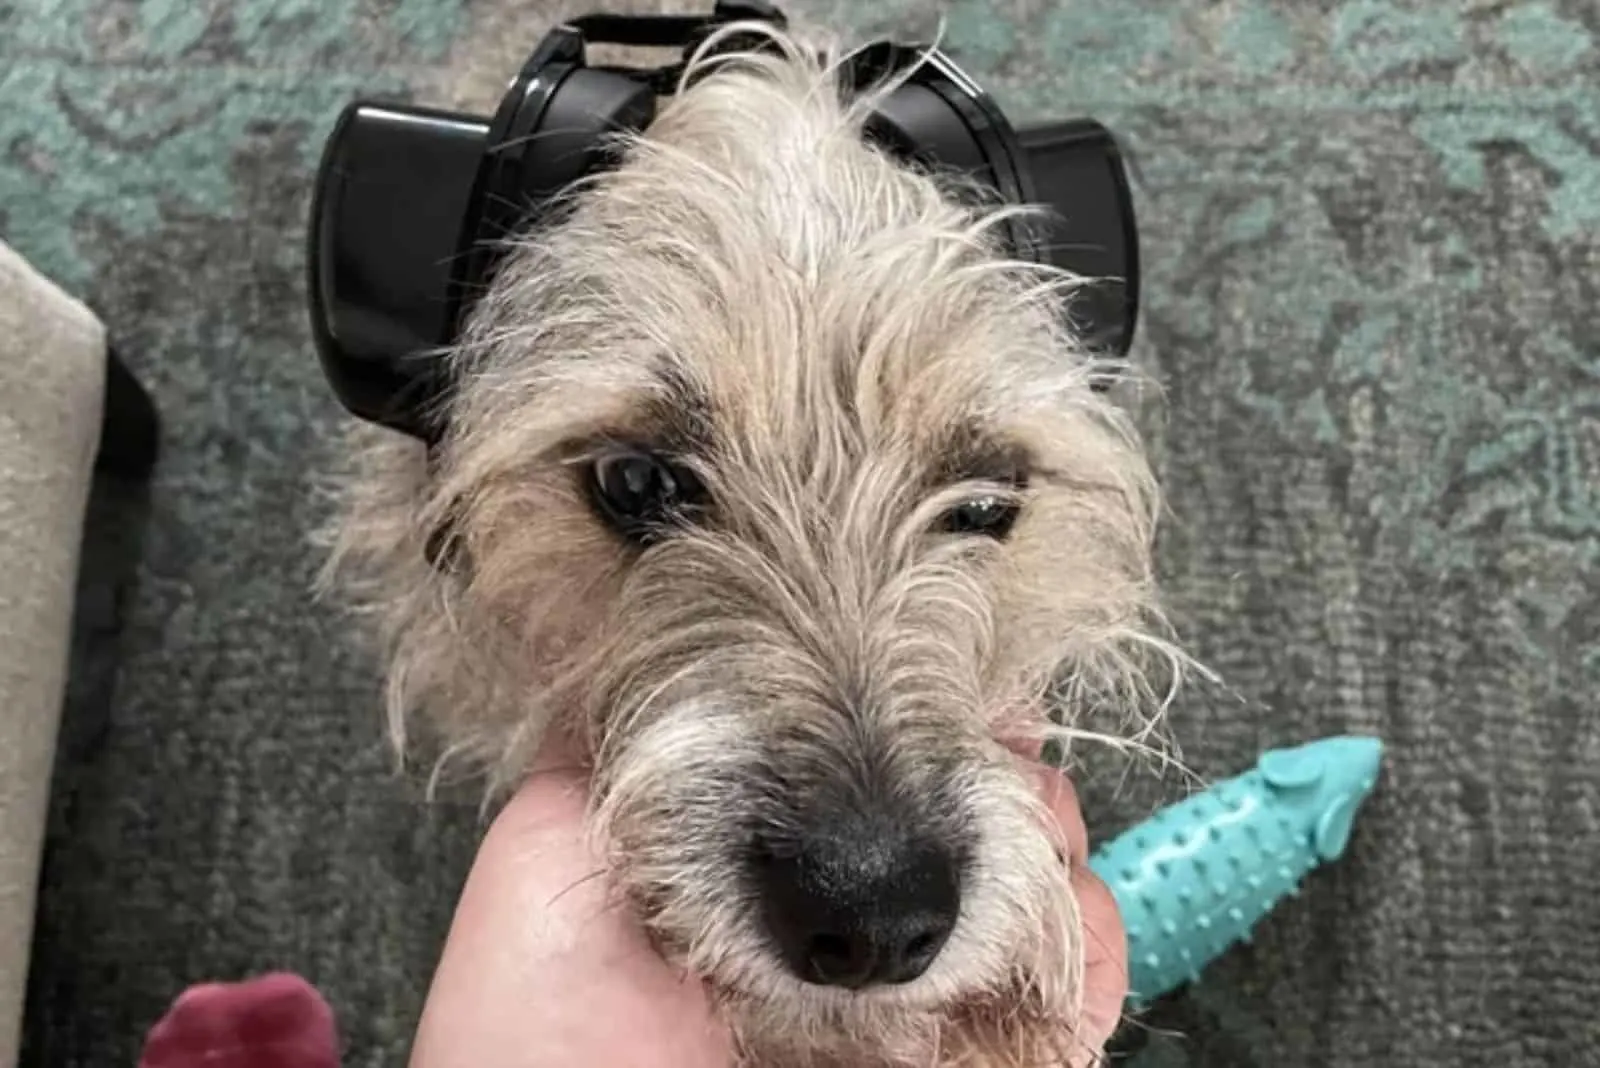 dog wearing noise-canceling headphones while his owner cuddling him